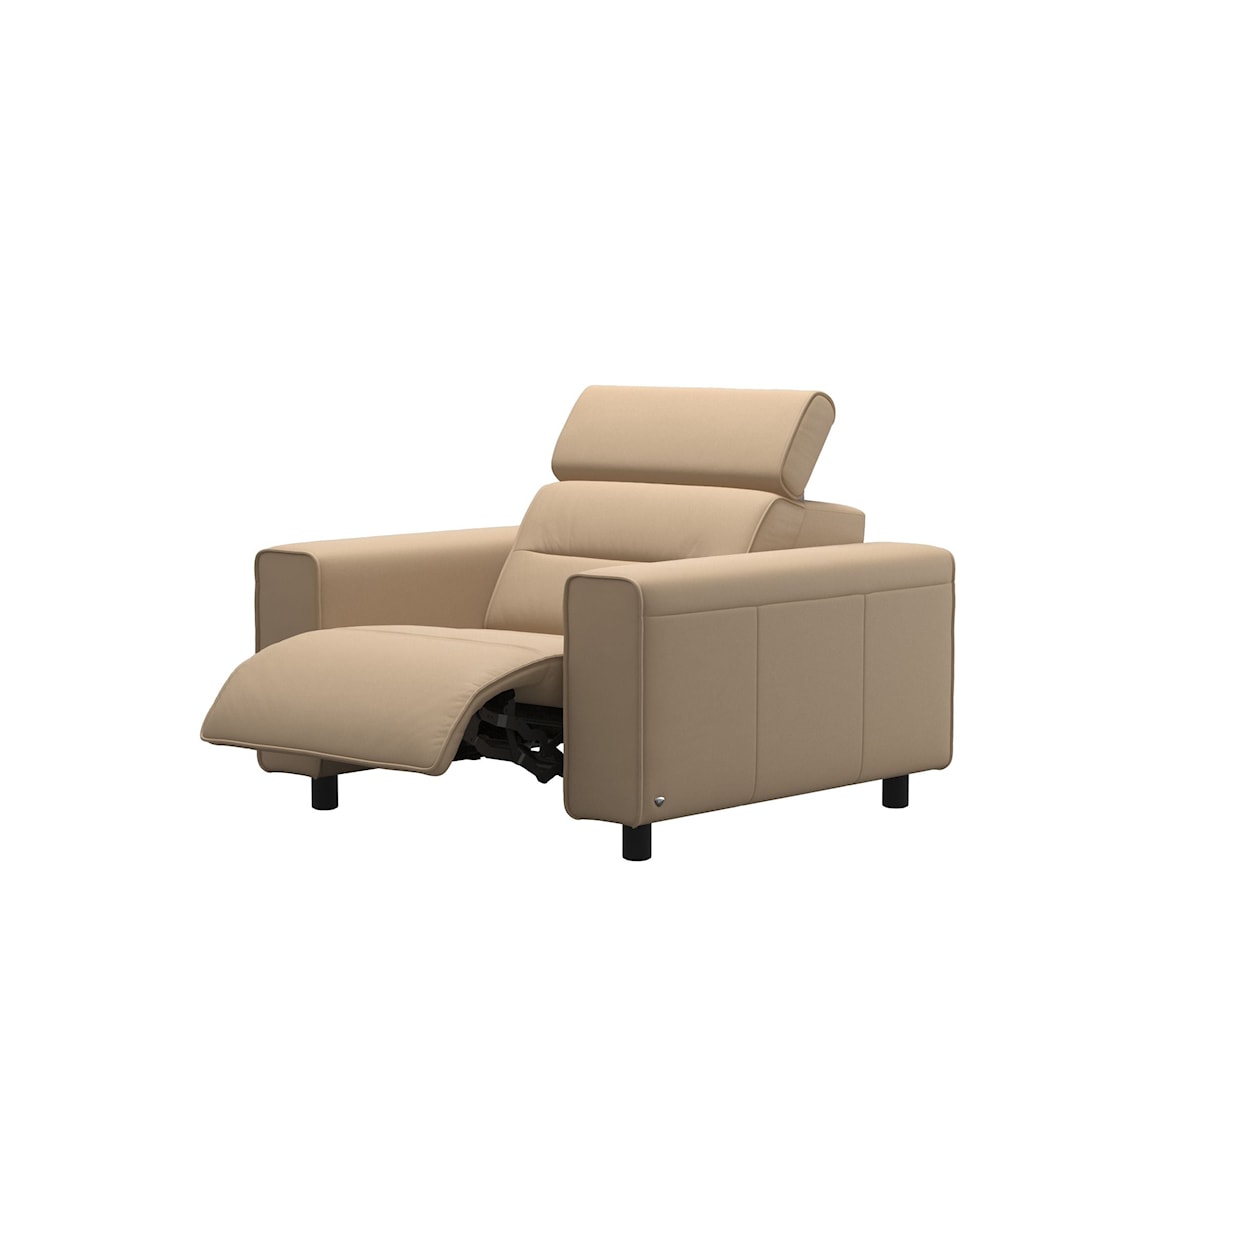 Stressless by Ekornes Emily Chair - Power - Wide Arms